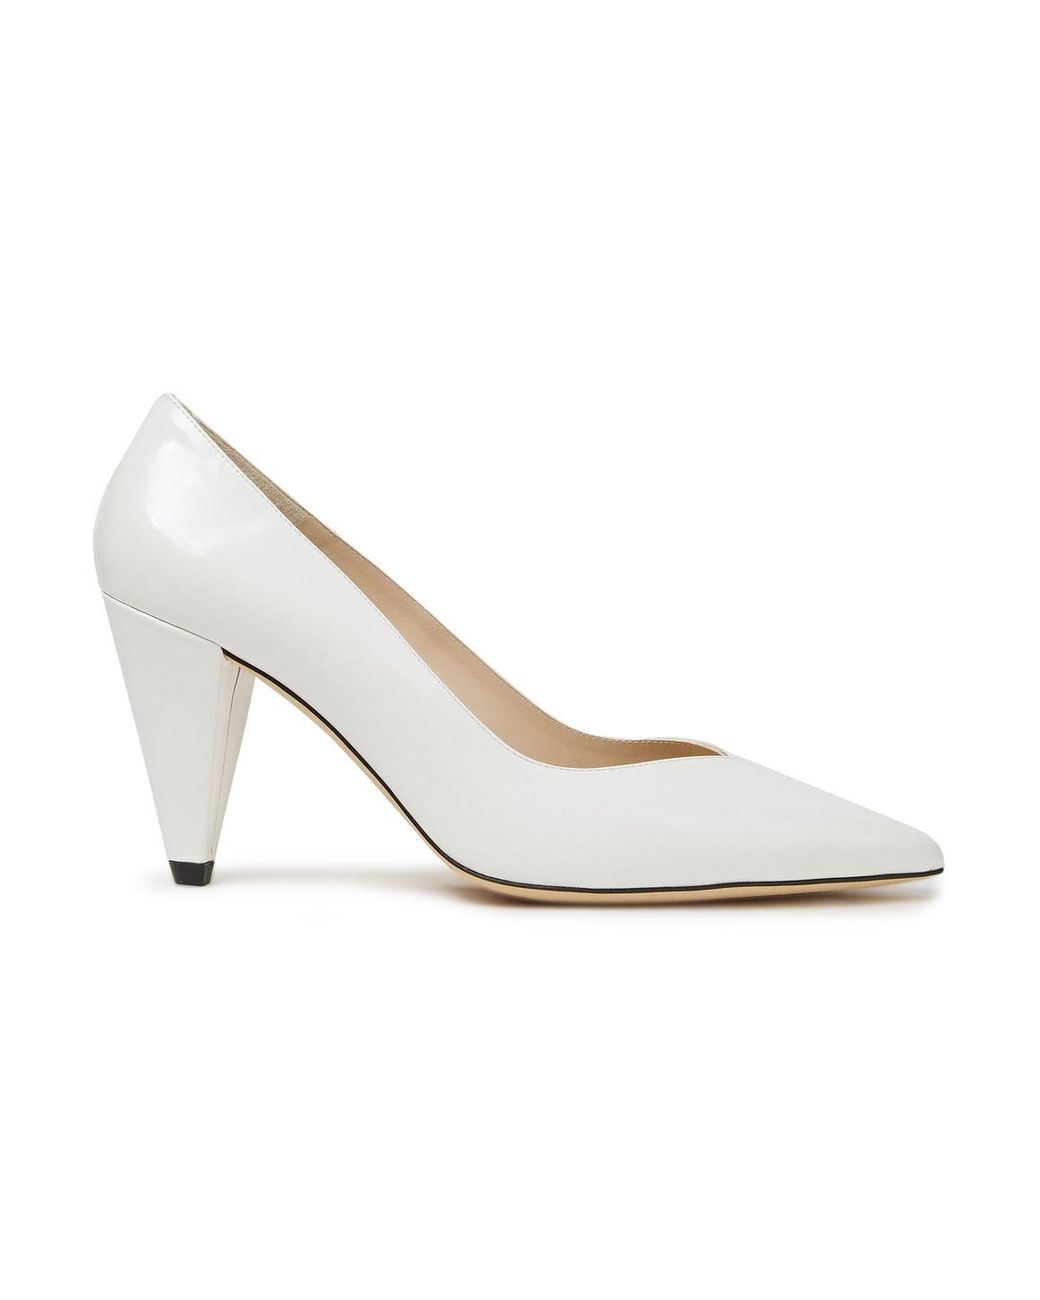 Sandro Polished Leather Pumps in White | Lyst